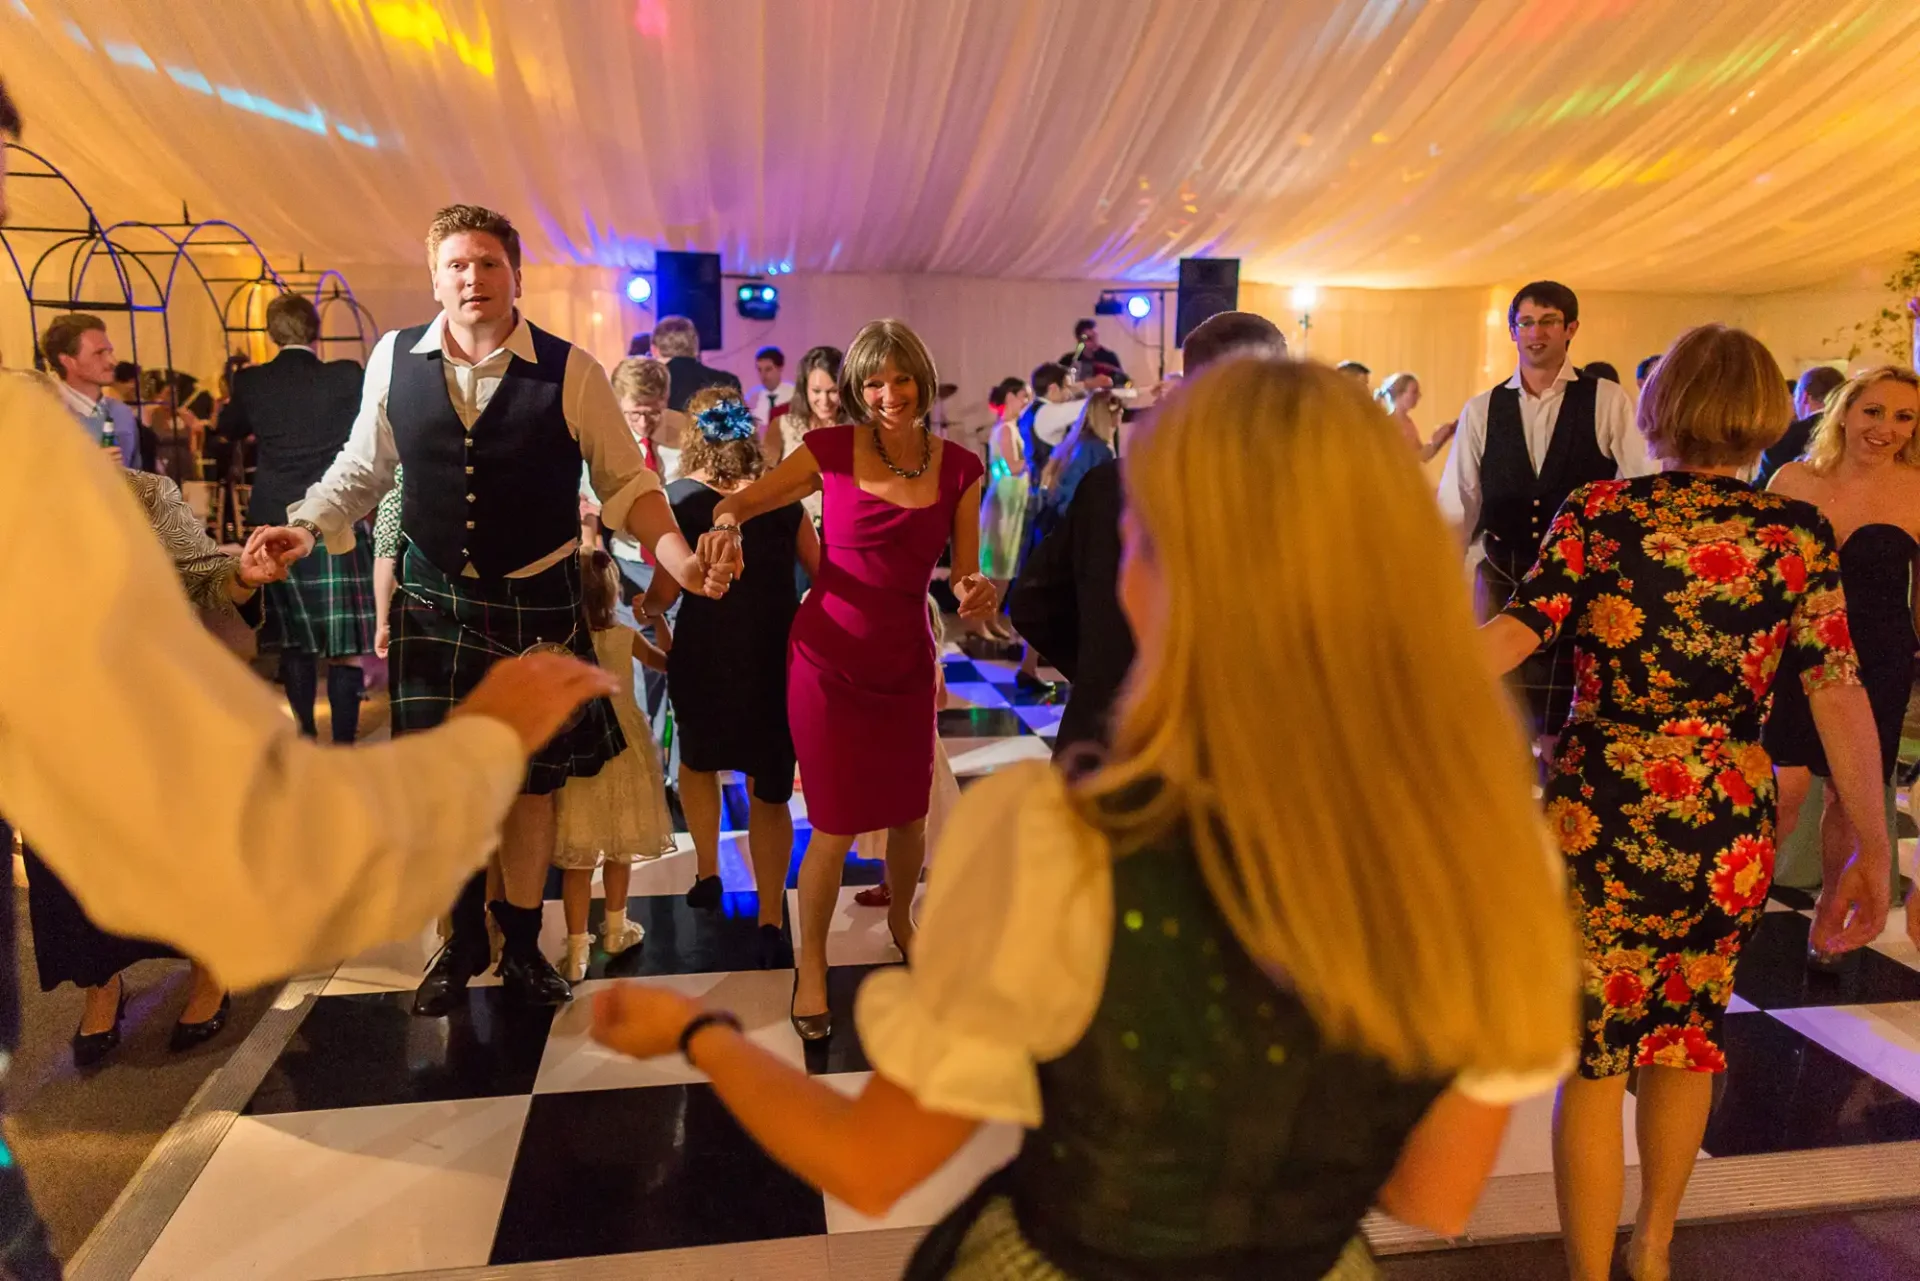 People dancing at a lively indoor party with colorful lights, including a man in a kilt leading the dance.